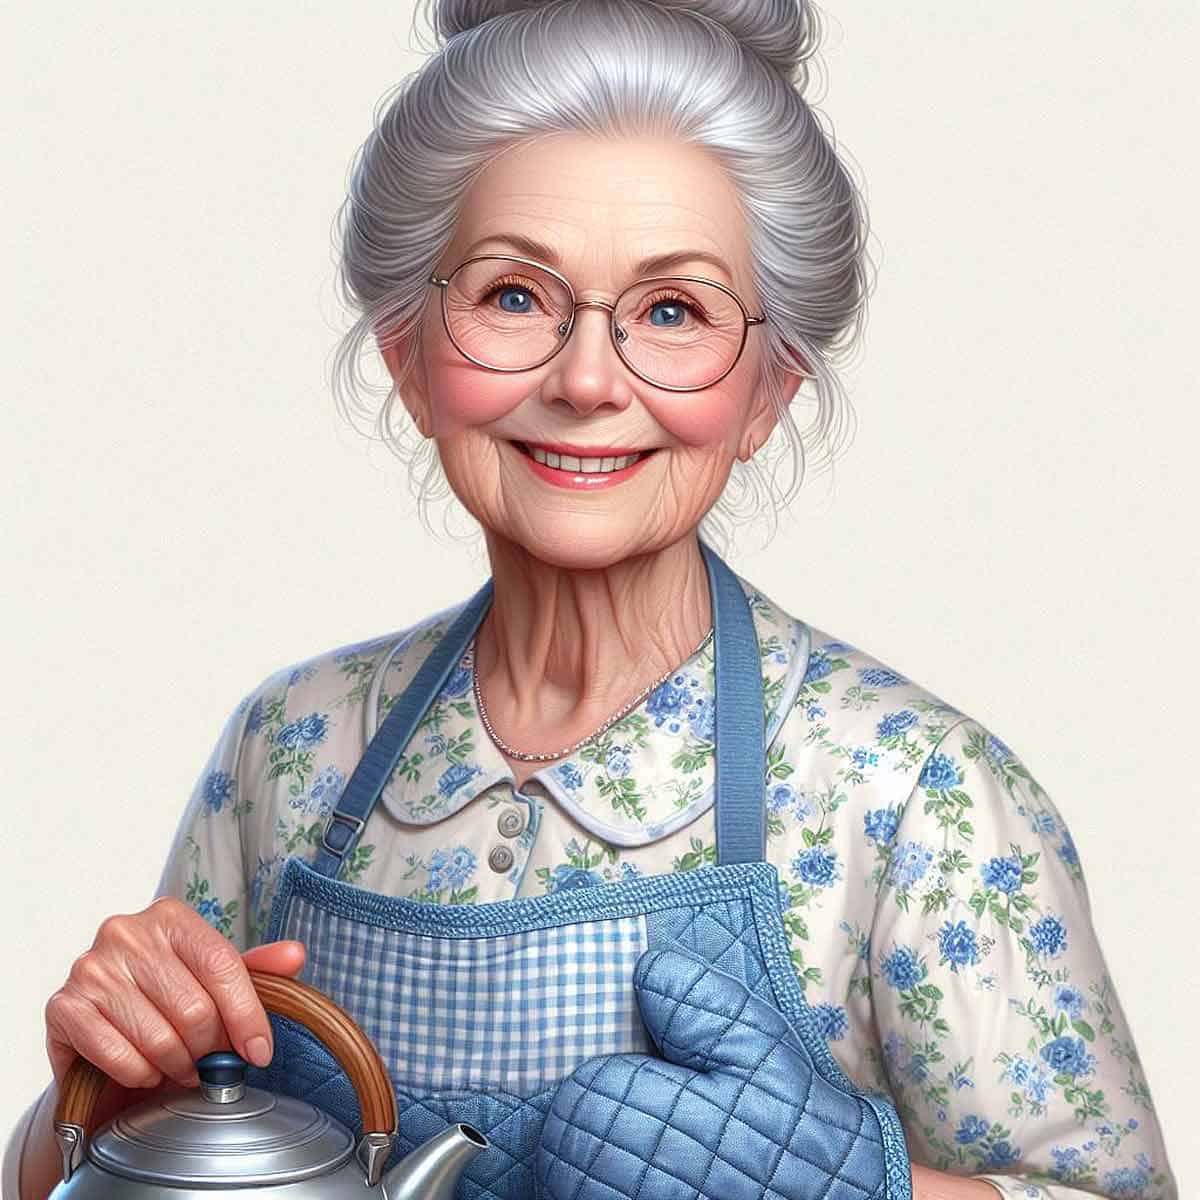 A grandmother wearing a blue oven mitt and holding a silver tea kettle.